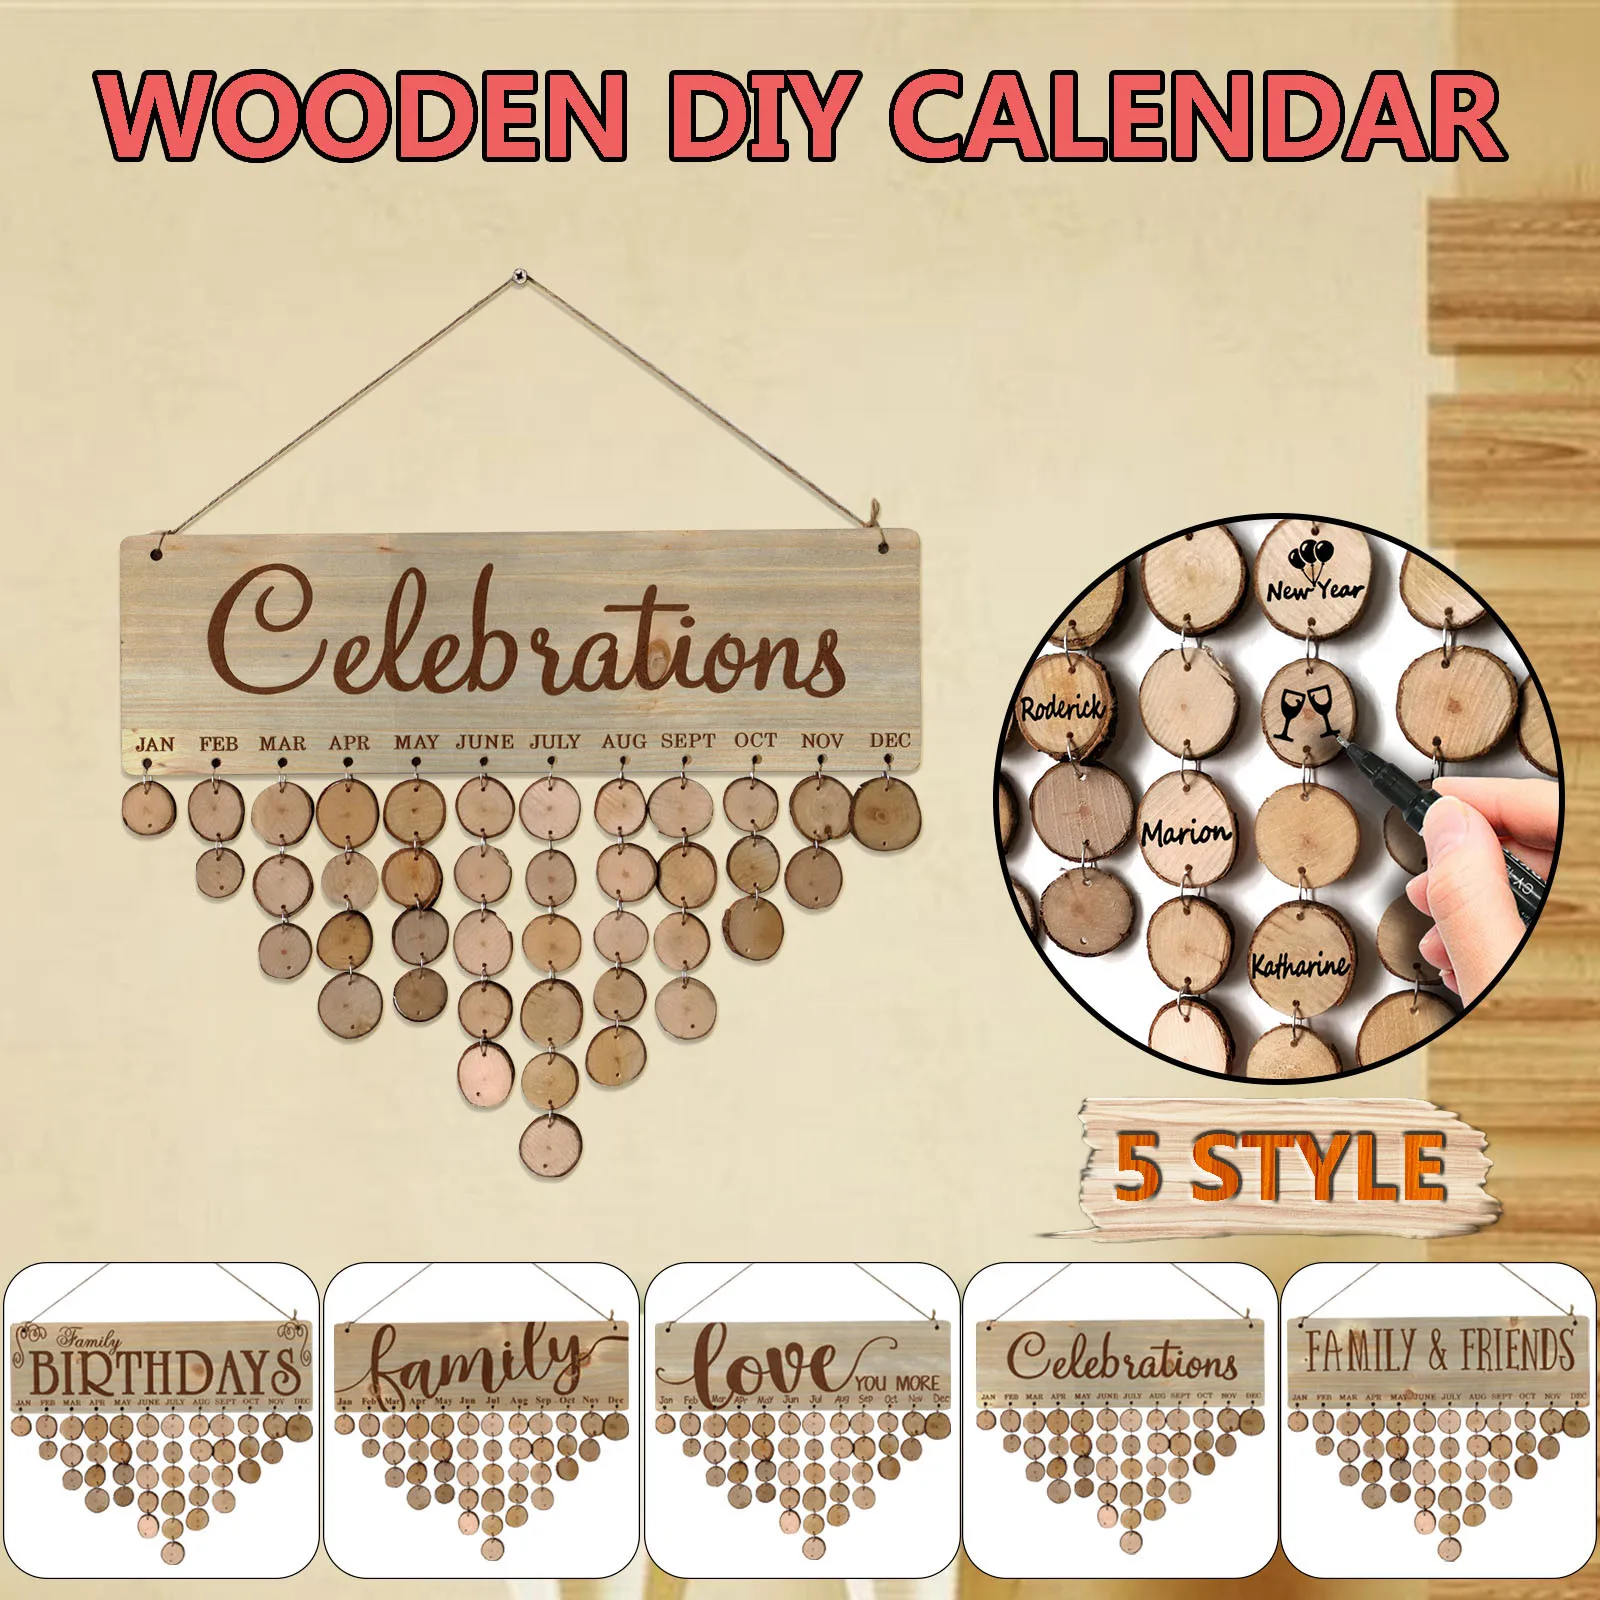 

Chritsmas Birthday Special Days Reminder Board Home Hanging Decor Wooden Calendar Board Hanging Ornament New Year Wall Decor L*5